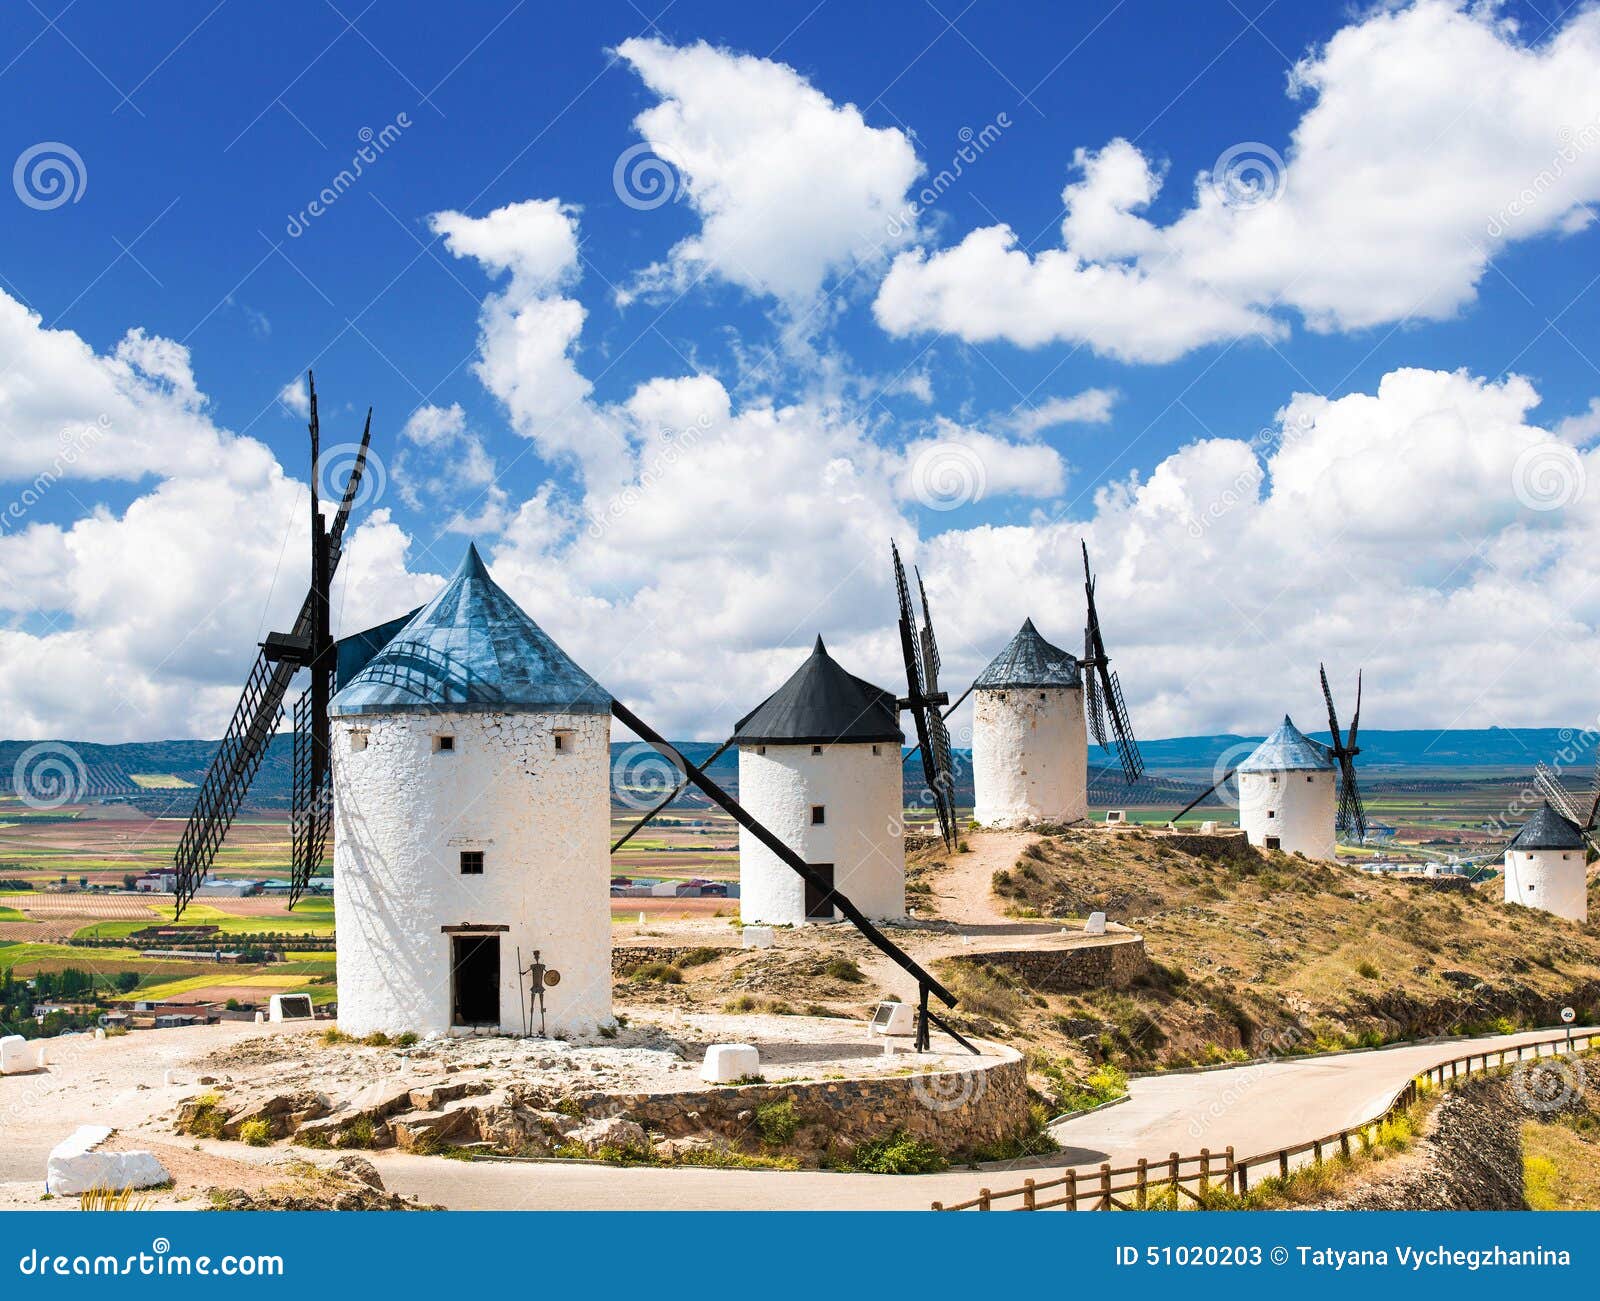 group of windmills